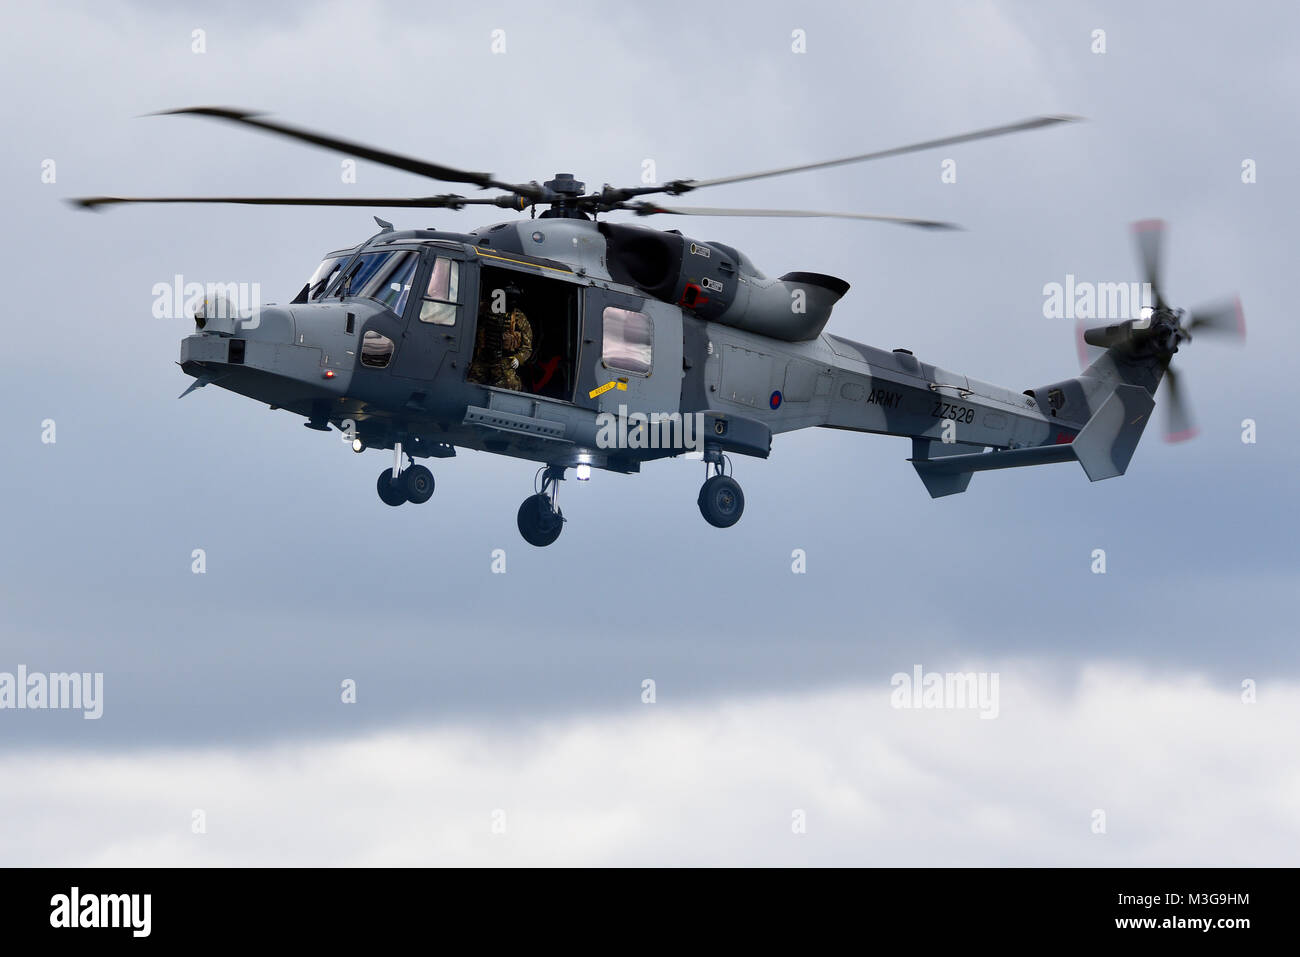 British Army Air Corps Westland Wildcat helicopter. AgustaWestland AW159 Wildcat ZZ520. Design based on Lynx Stock Photo